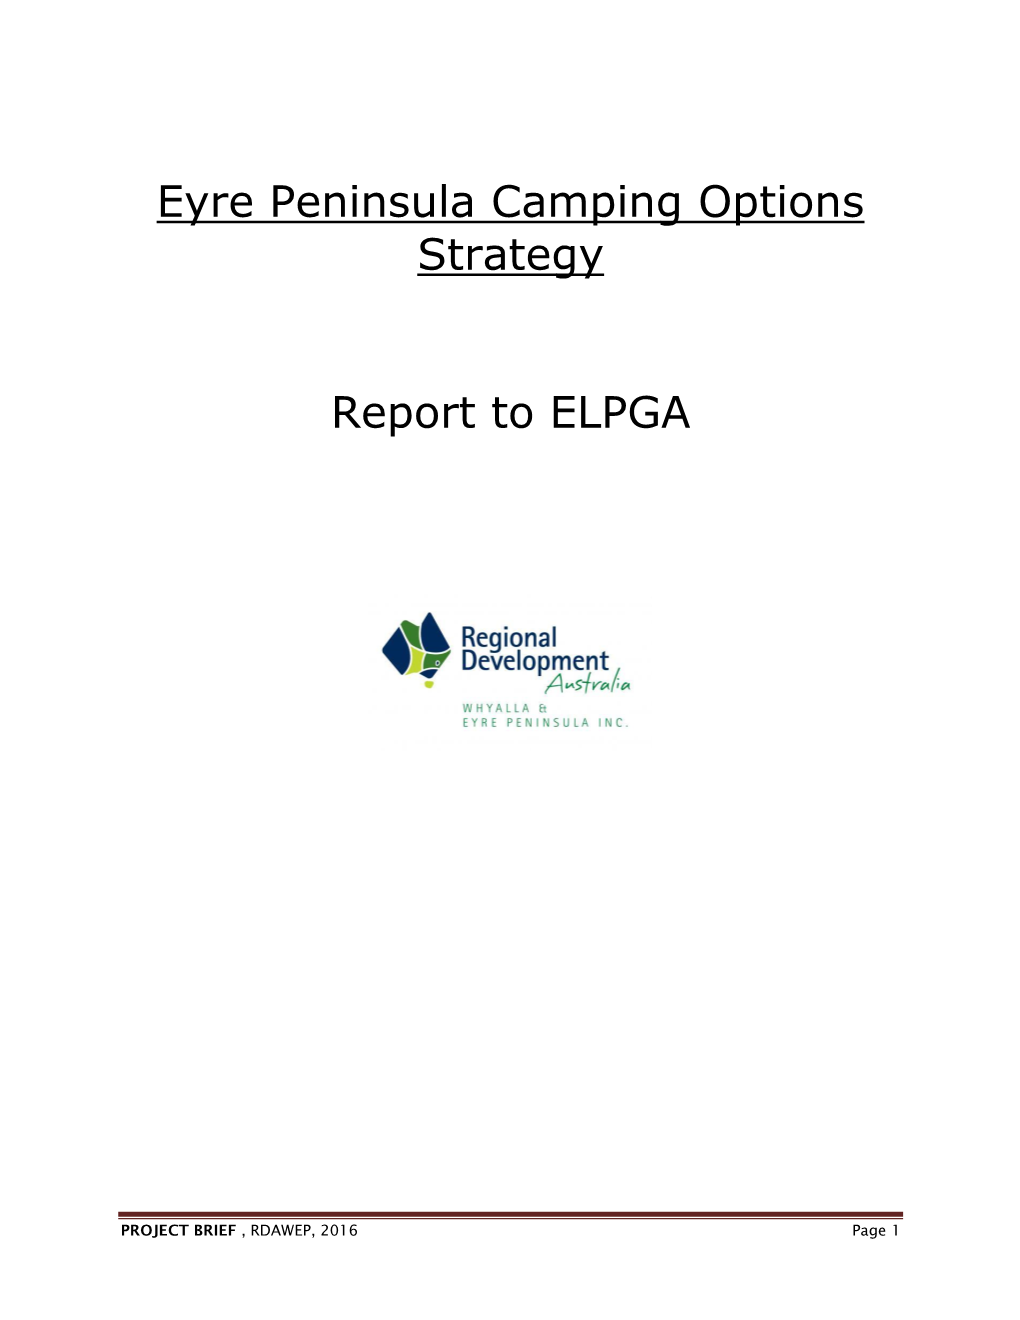 Eyre Peninsula Camping Options Strategy Report to ELPGA